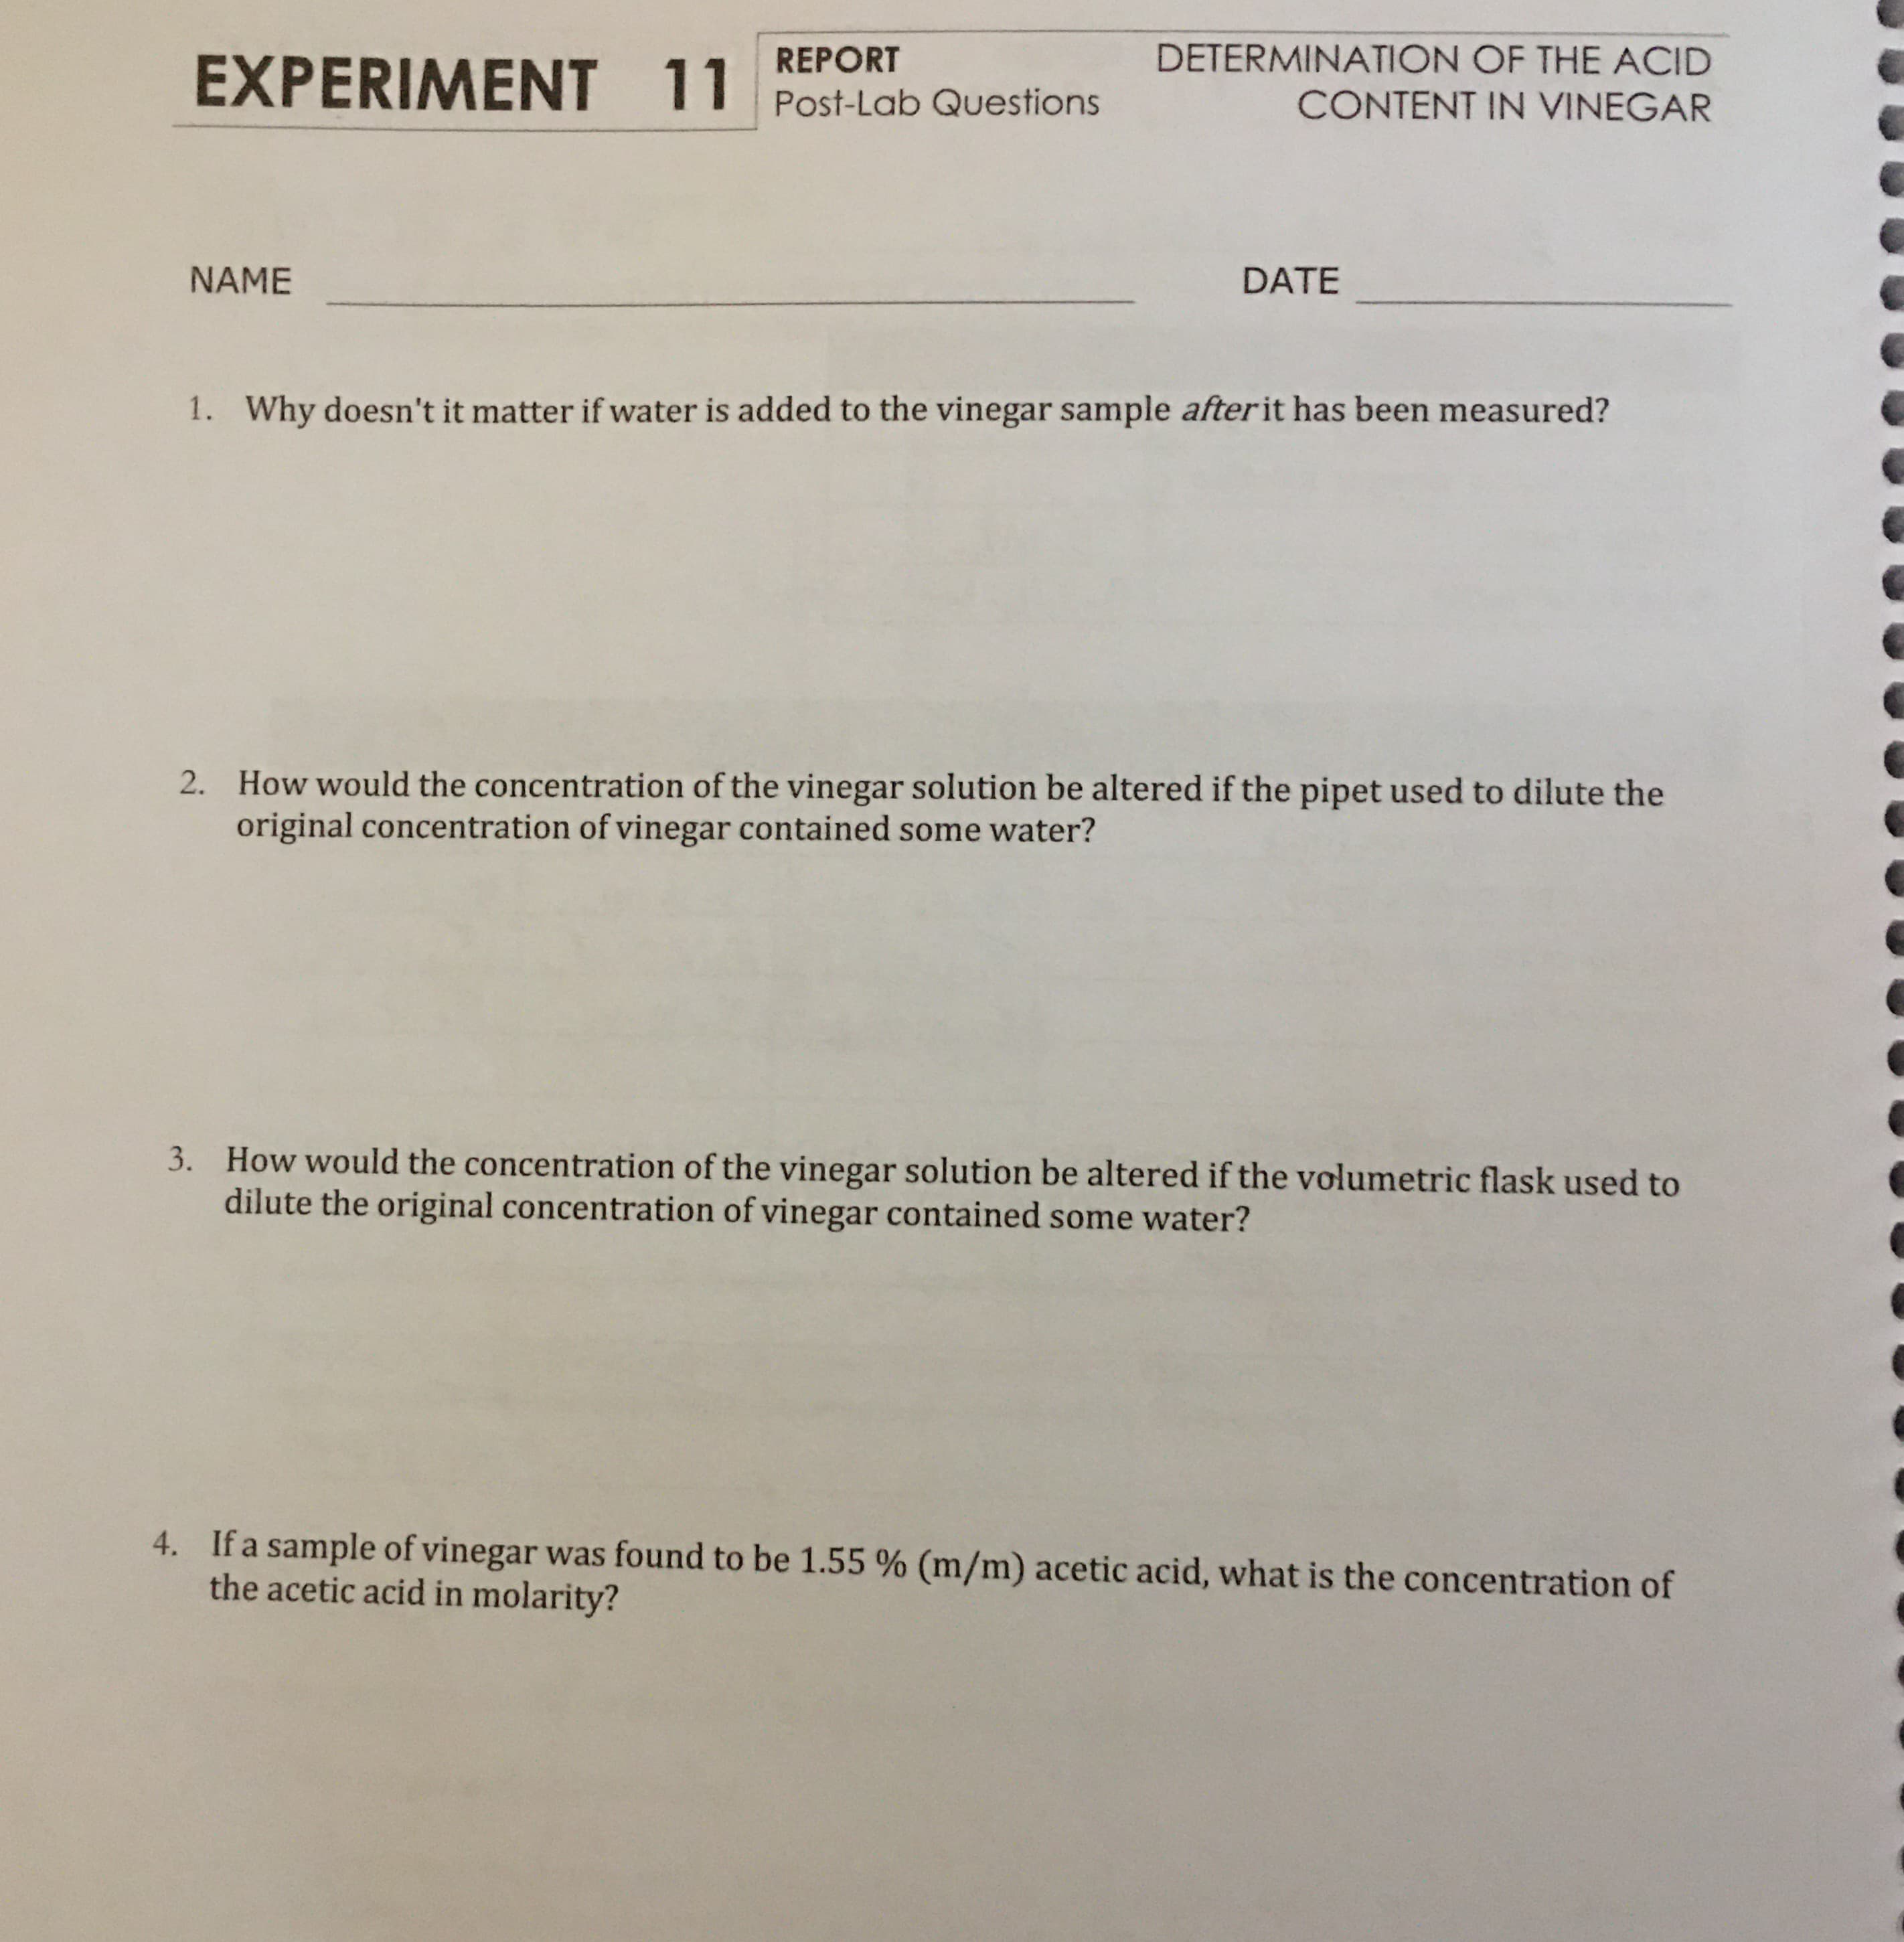 DETERMINATION OF THE ACID
REPORT
EXPERIMENT 11
Post-Lab Questions
CONTENT IN VINEGAR
NAME
DATE
Why doesn't it matter if water is added to the vinegar sample afterit has been measured?
1.
How would the concentration of the vinegar solution be altered if the pipet used to dilute the
original concentration of vinegar contained some water?
2.
How would the concentration of the vinegar solution be altered if the volumetric flask used to
dilute the original concentration of vinegar contained some water?
3.
4. If a sample of vinegar was found to be 1.55 % (m/m) acetic acid, what is the concentration of
the acetic acid in molarity?
